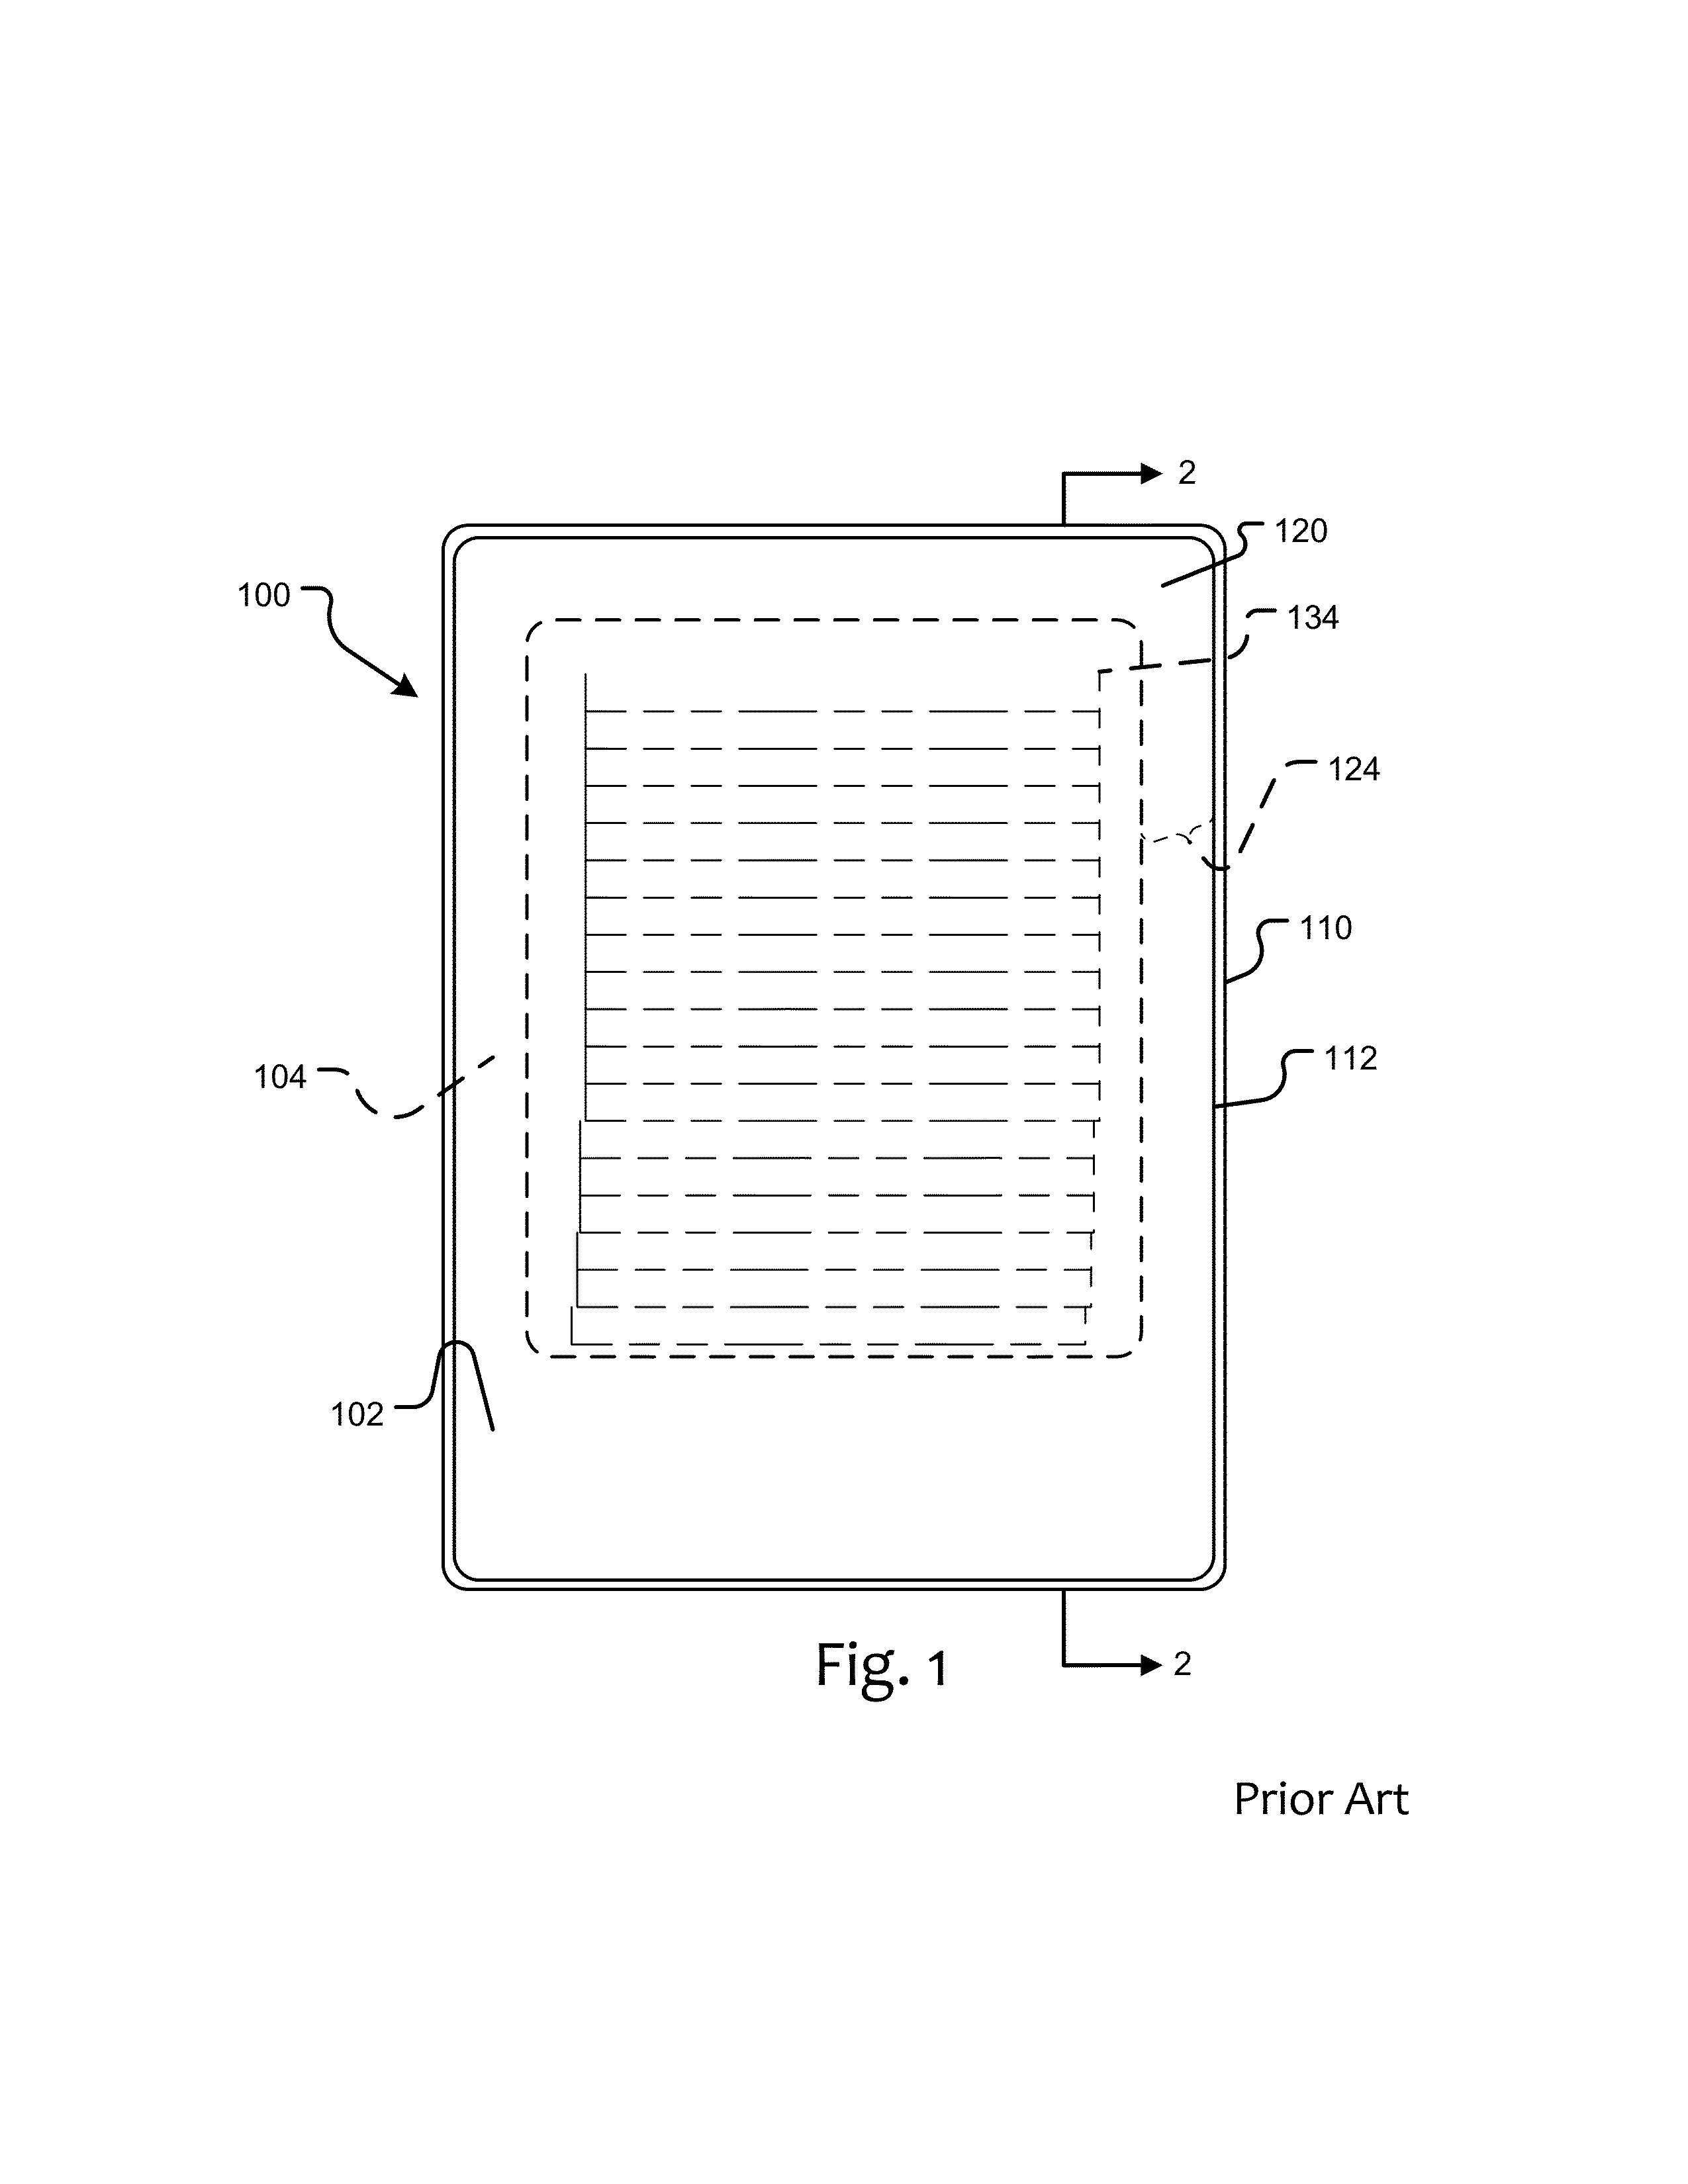 Structures and manufacturing methods for glass covered electronic devices